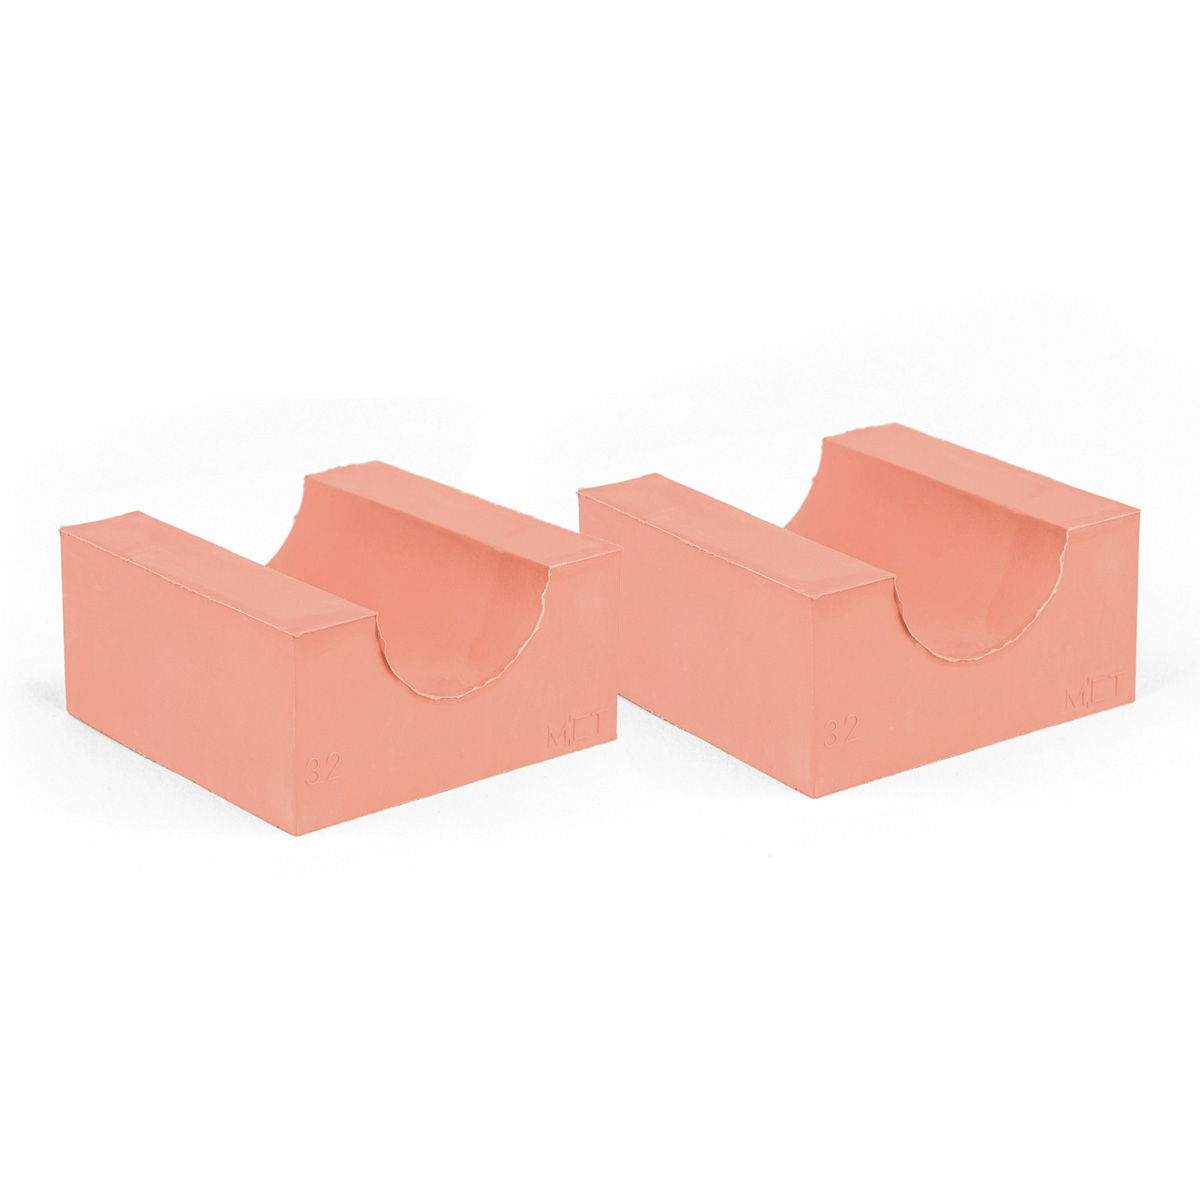 60-32*2 Set of 2 half insert block lycron, 60-32 for cable/pipe diam. 31.5-33.5mm